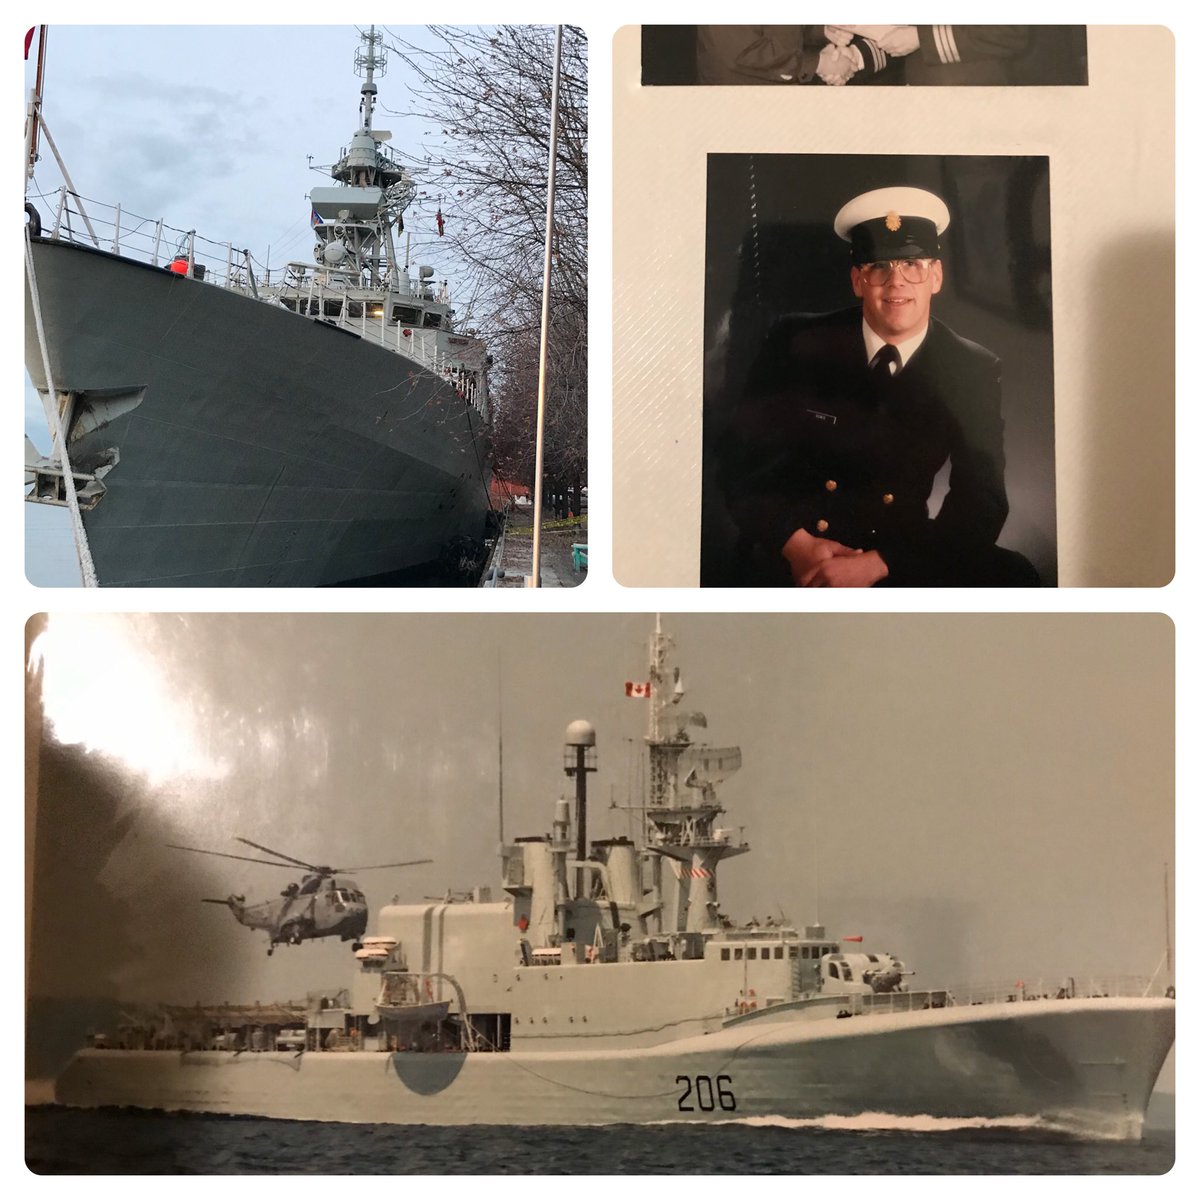 It has been 29 years since I was on a ship / in the @RoyalCanNavy on the #HMCSSaguenay206 but today I have the honour of spending time on the @HMCSSTJOHNS TY to @HMCS_NCSM_YORK & @IDIGTA for the invite